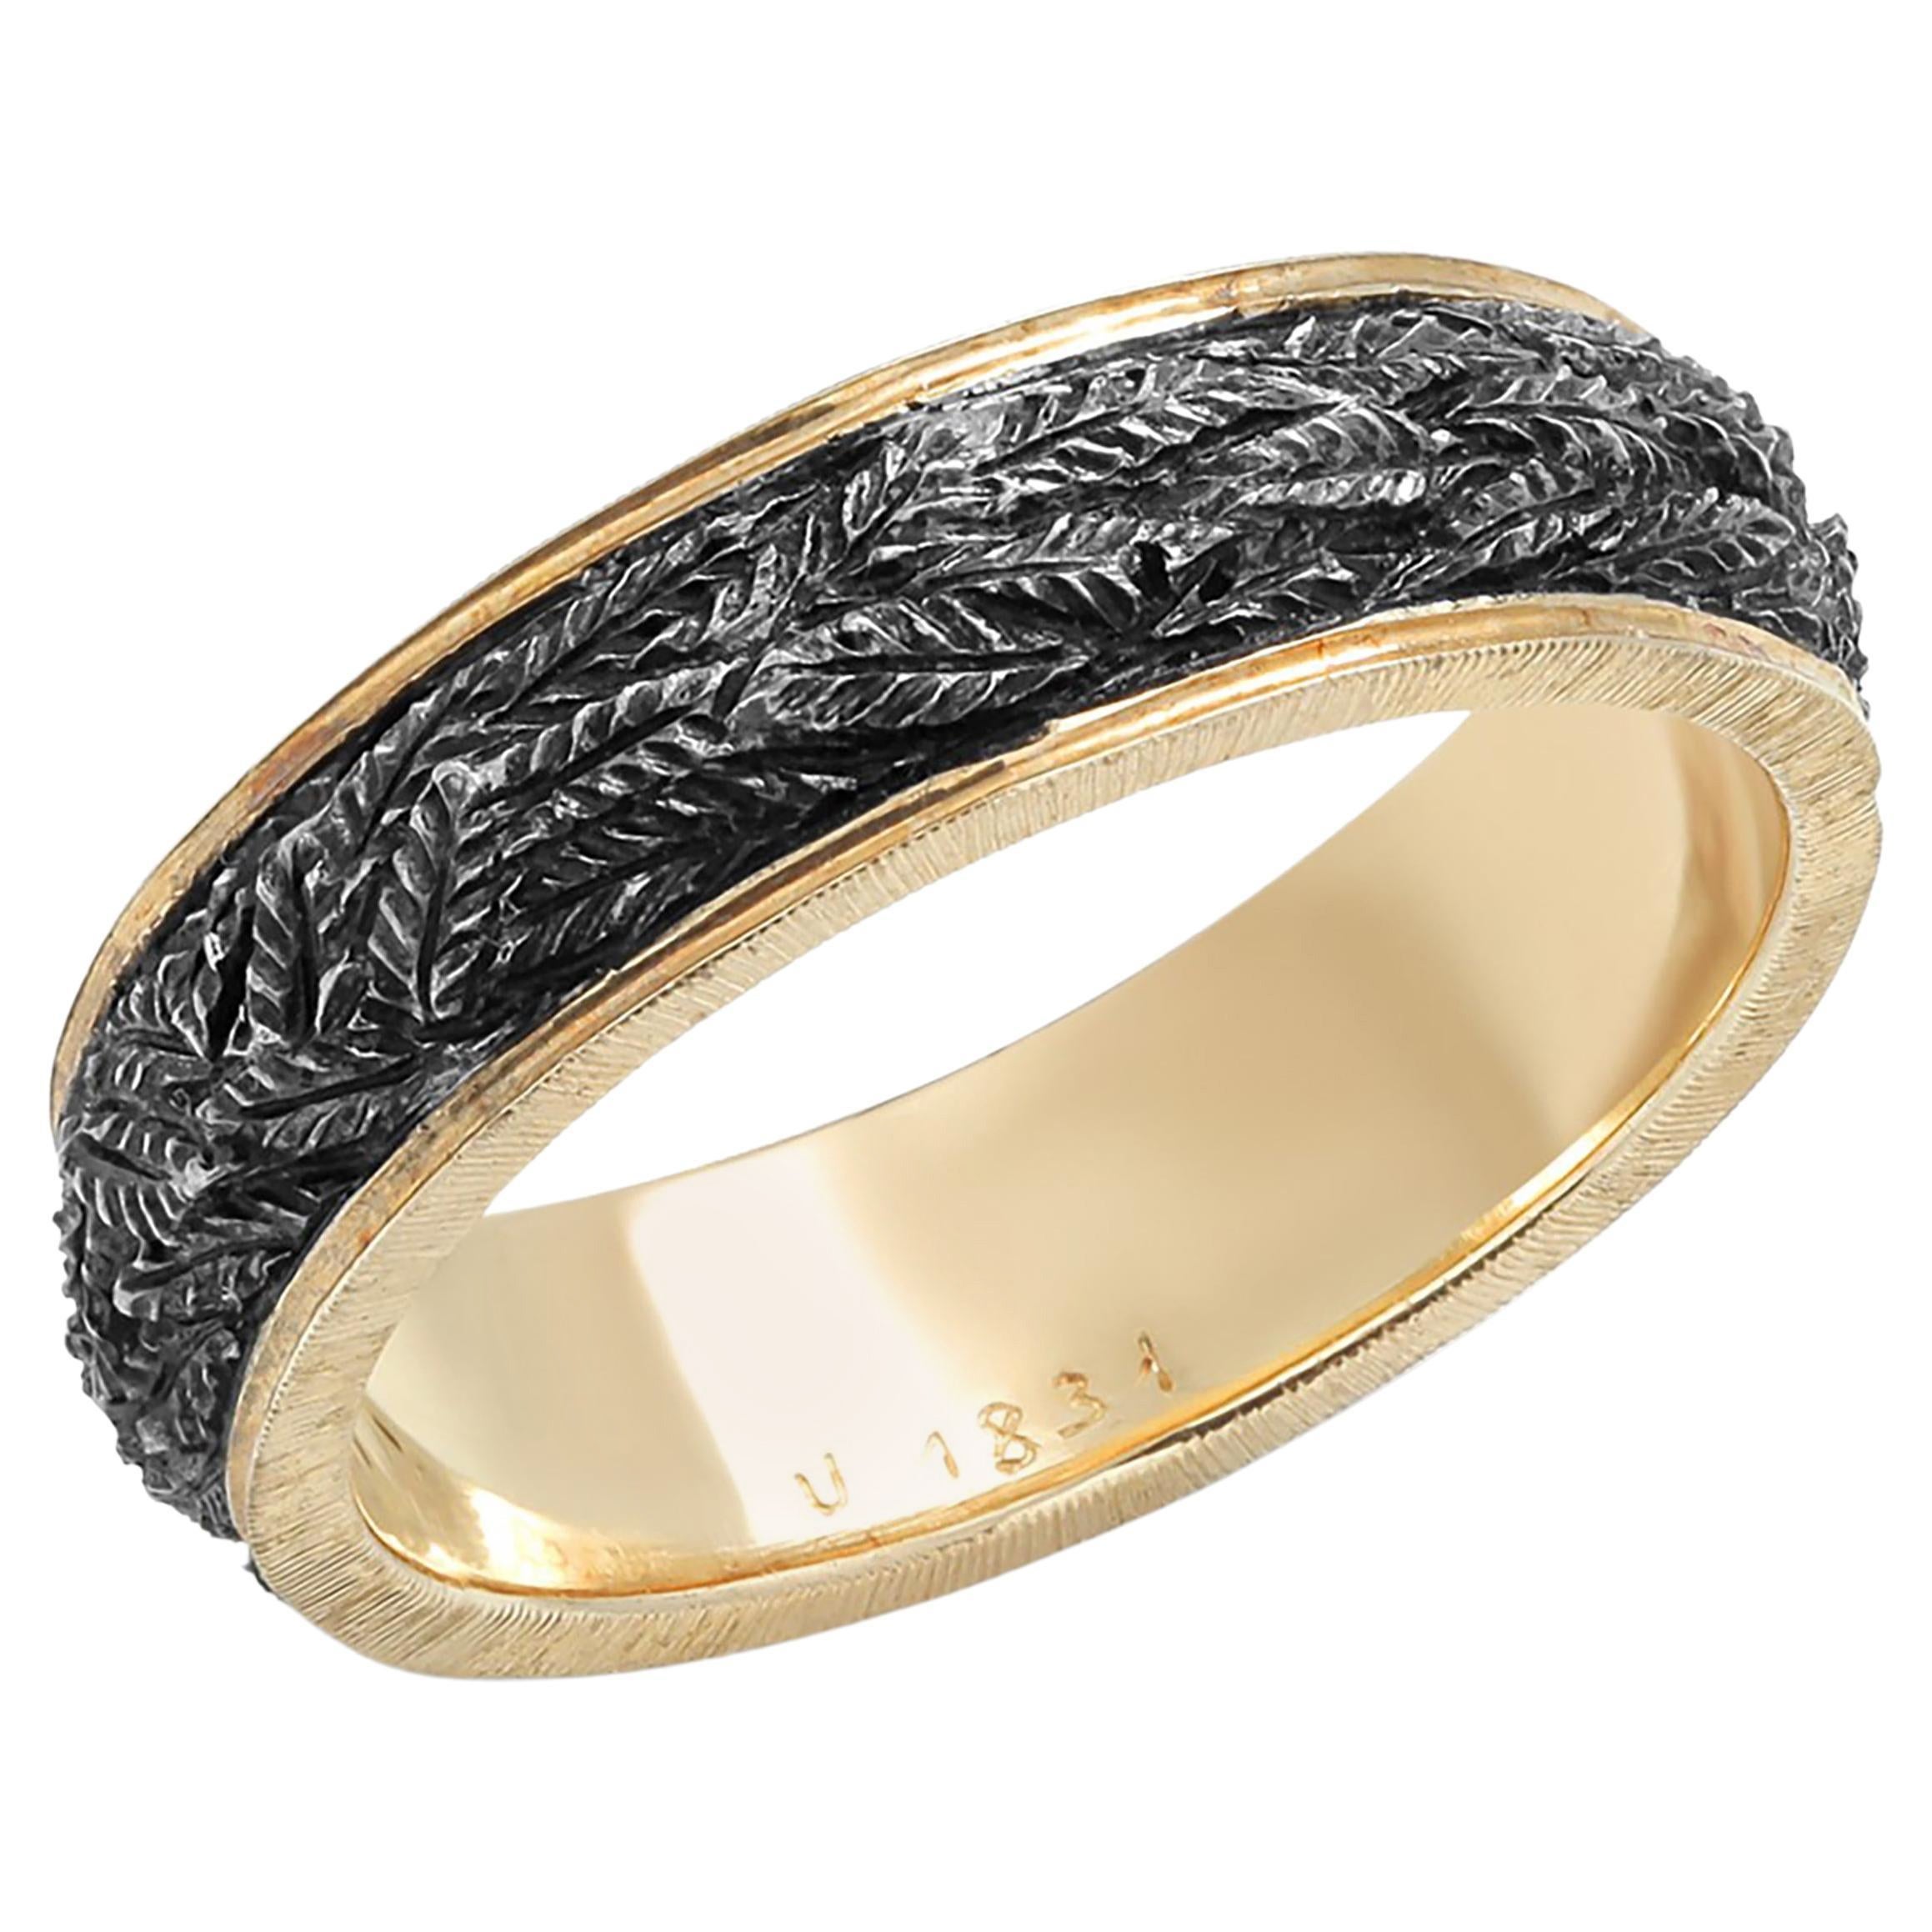 Buccellati Brunito Eighteen Karat Yellow Gold and Silver Band Size 5.75